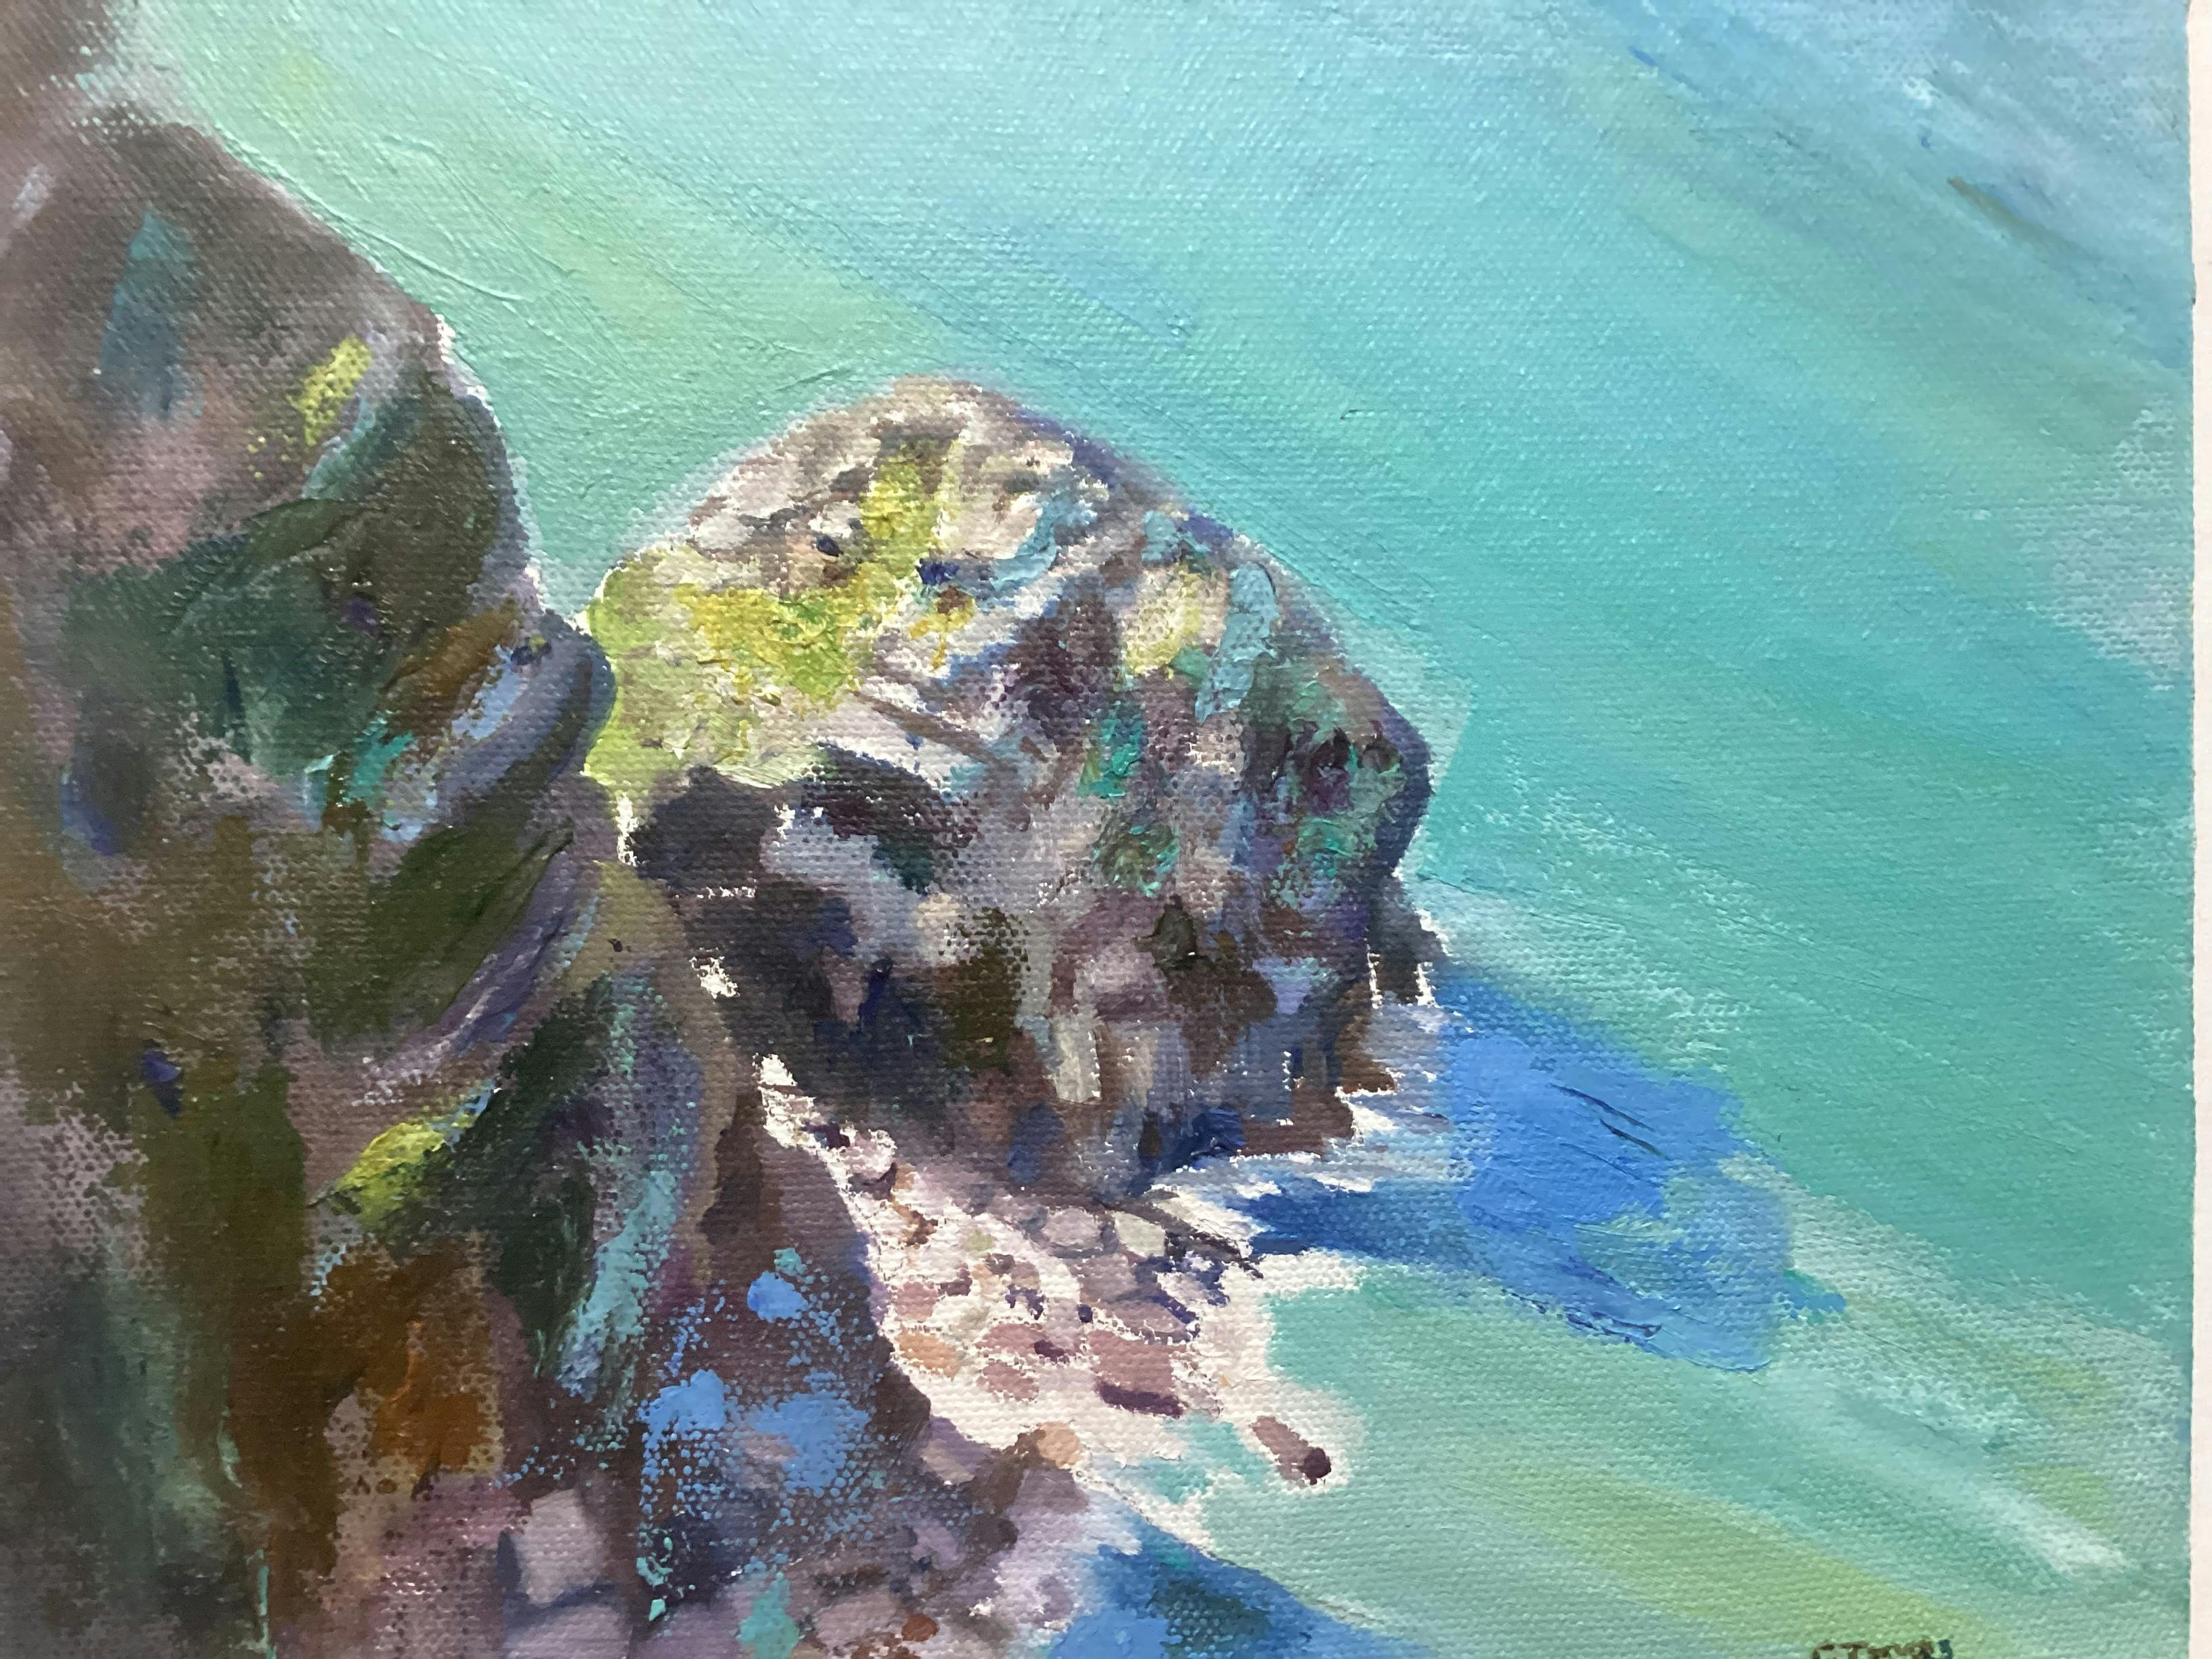 Cover Image for Looking down, Bedruthan steps